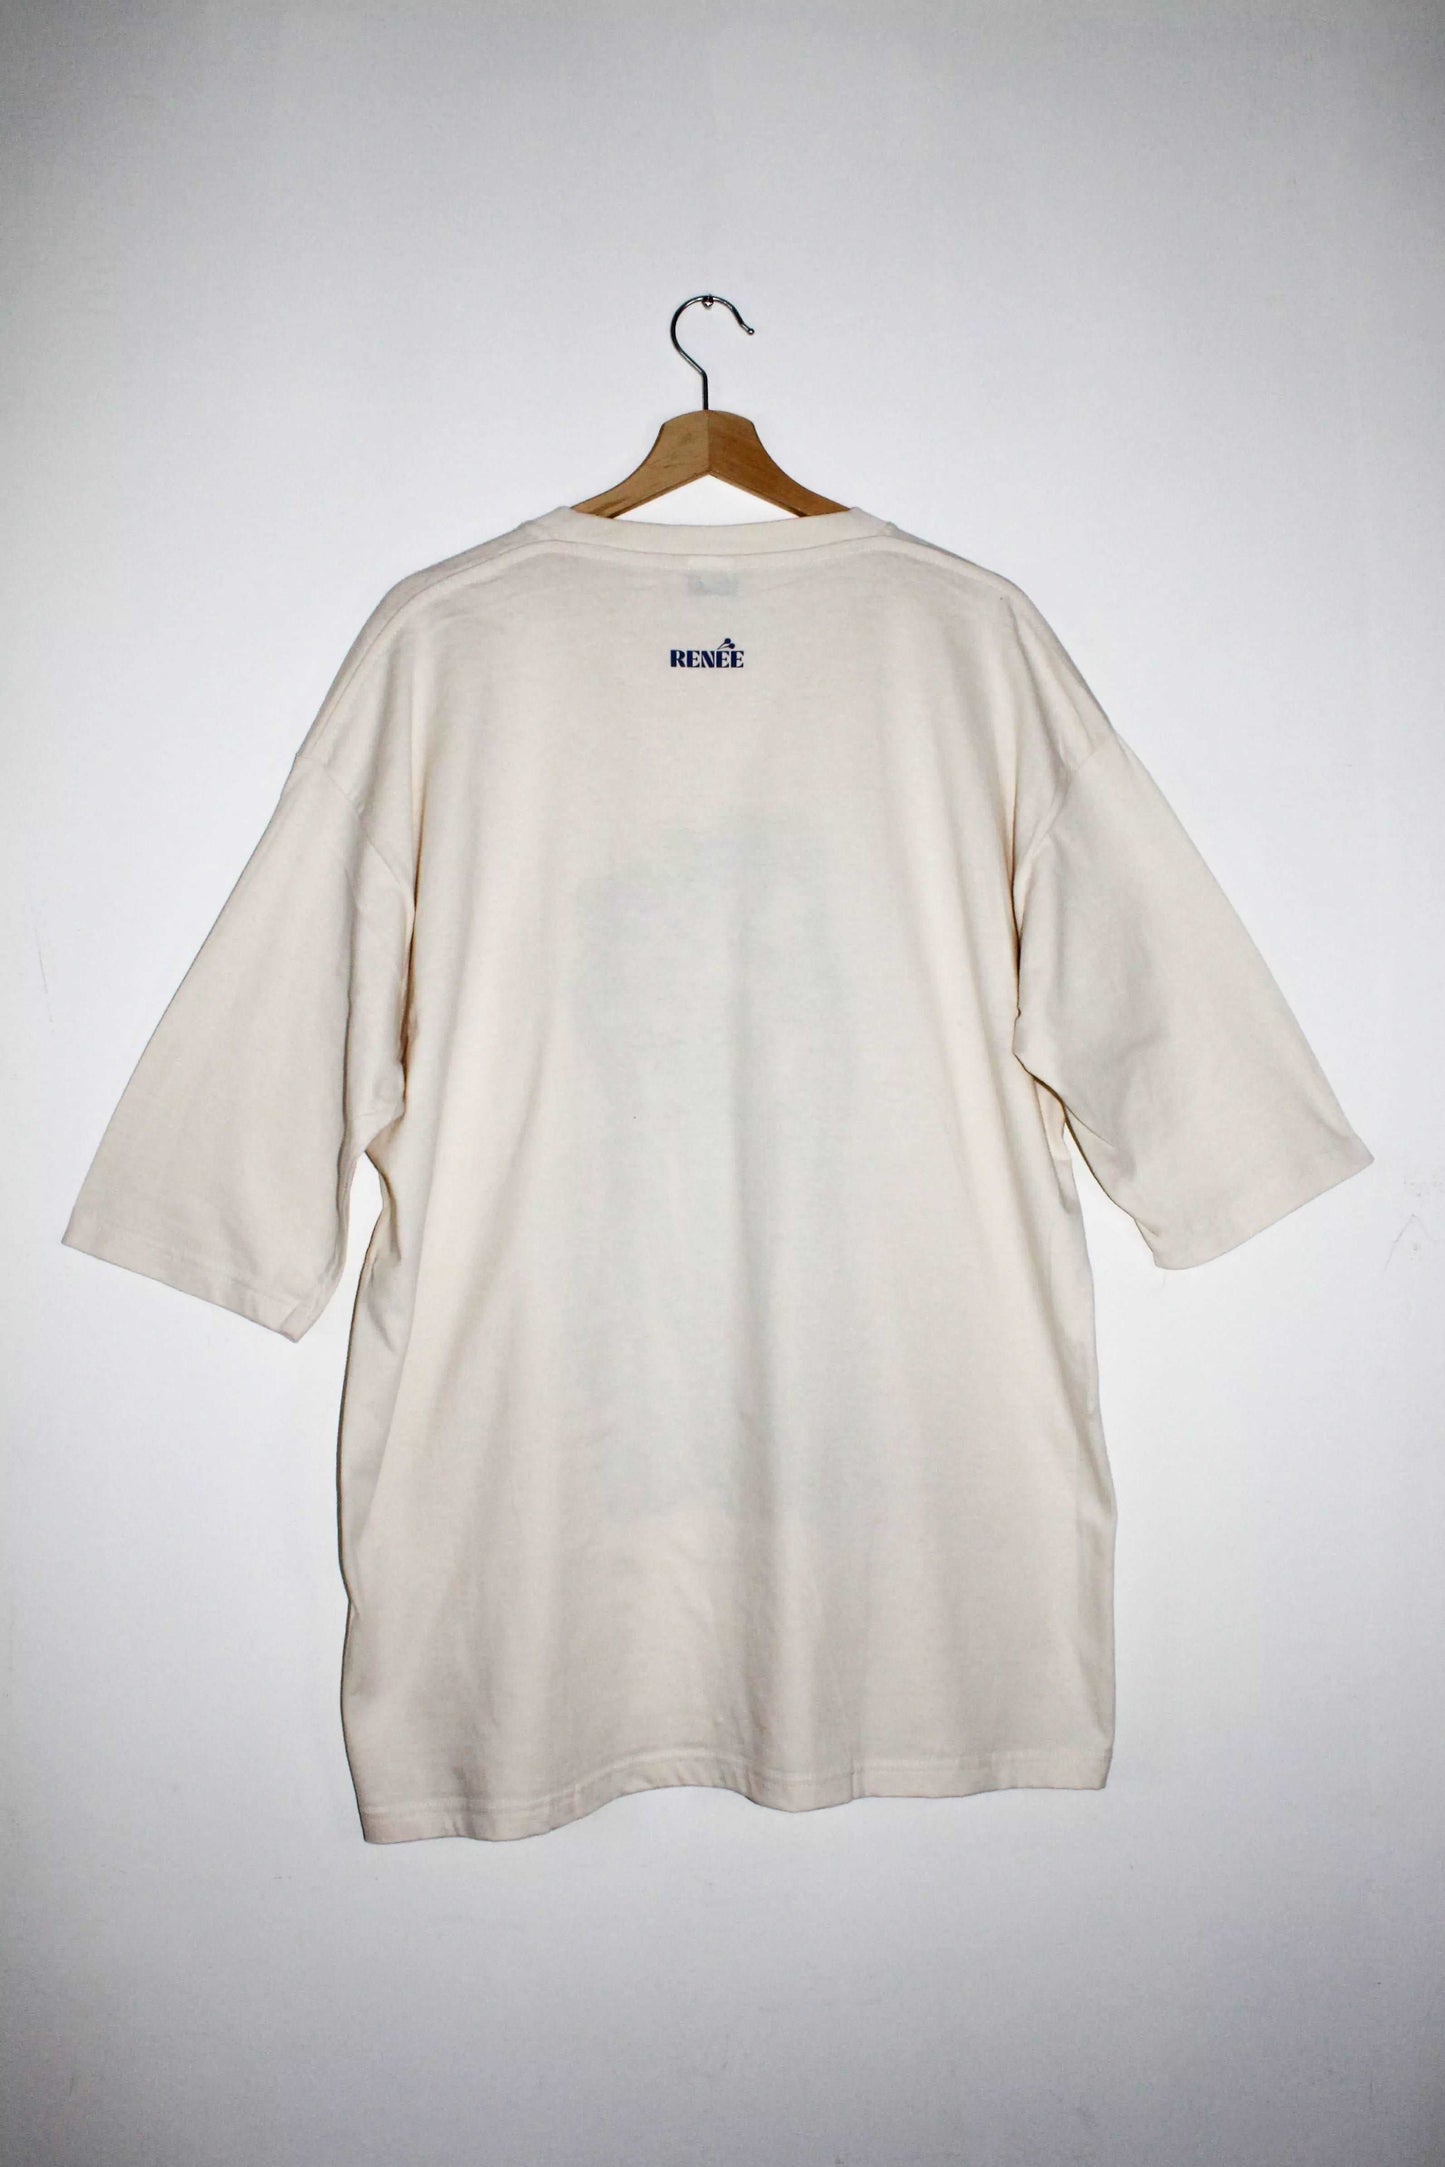 Back view cream streetwear oversized double vision blue blur graphic t shirt 3/4 sleeve